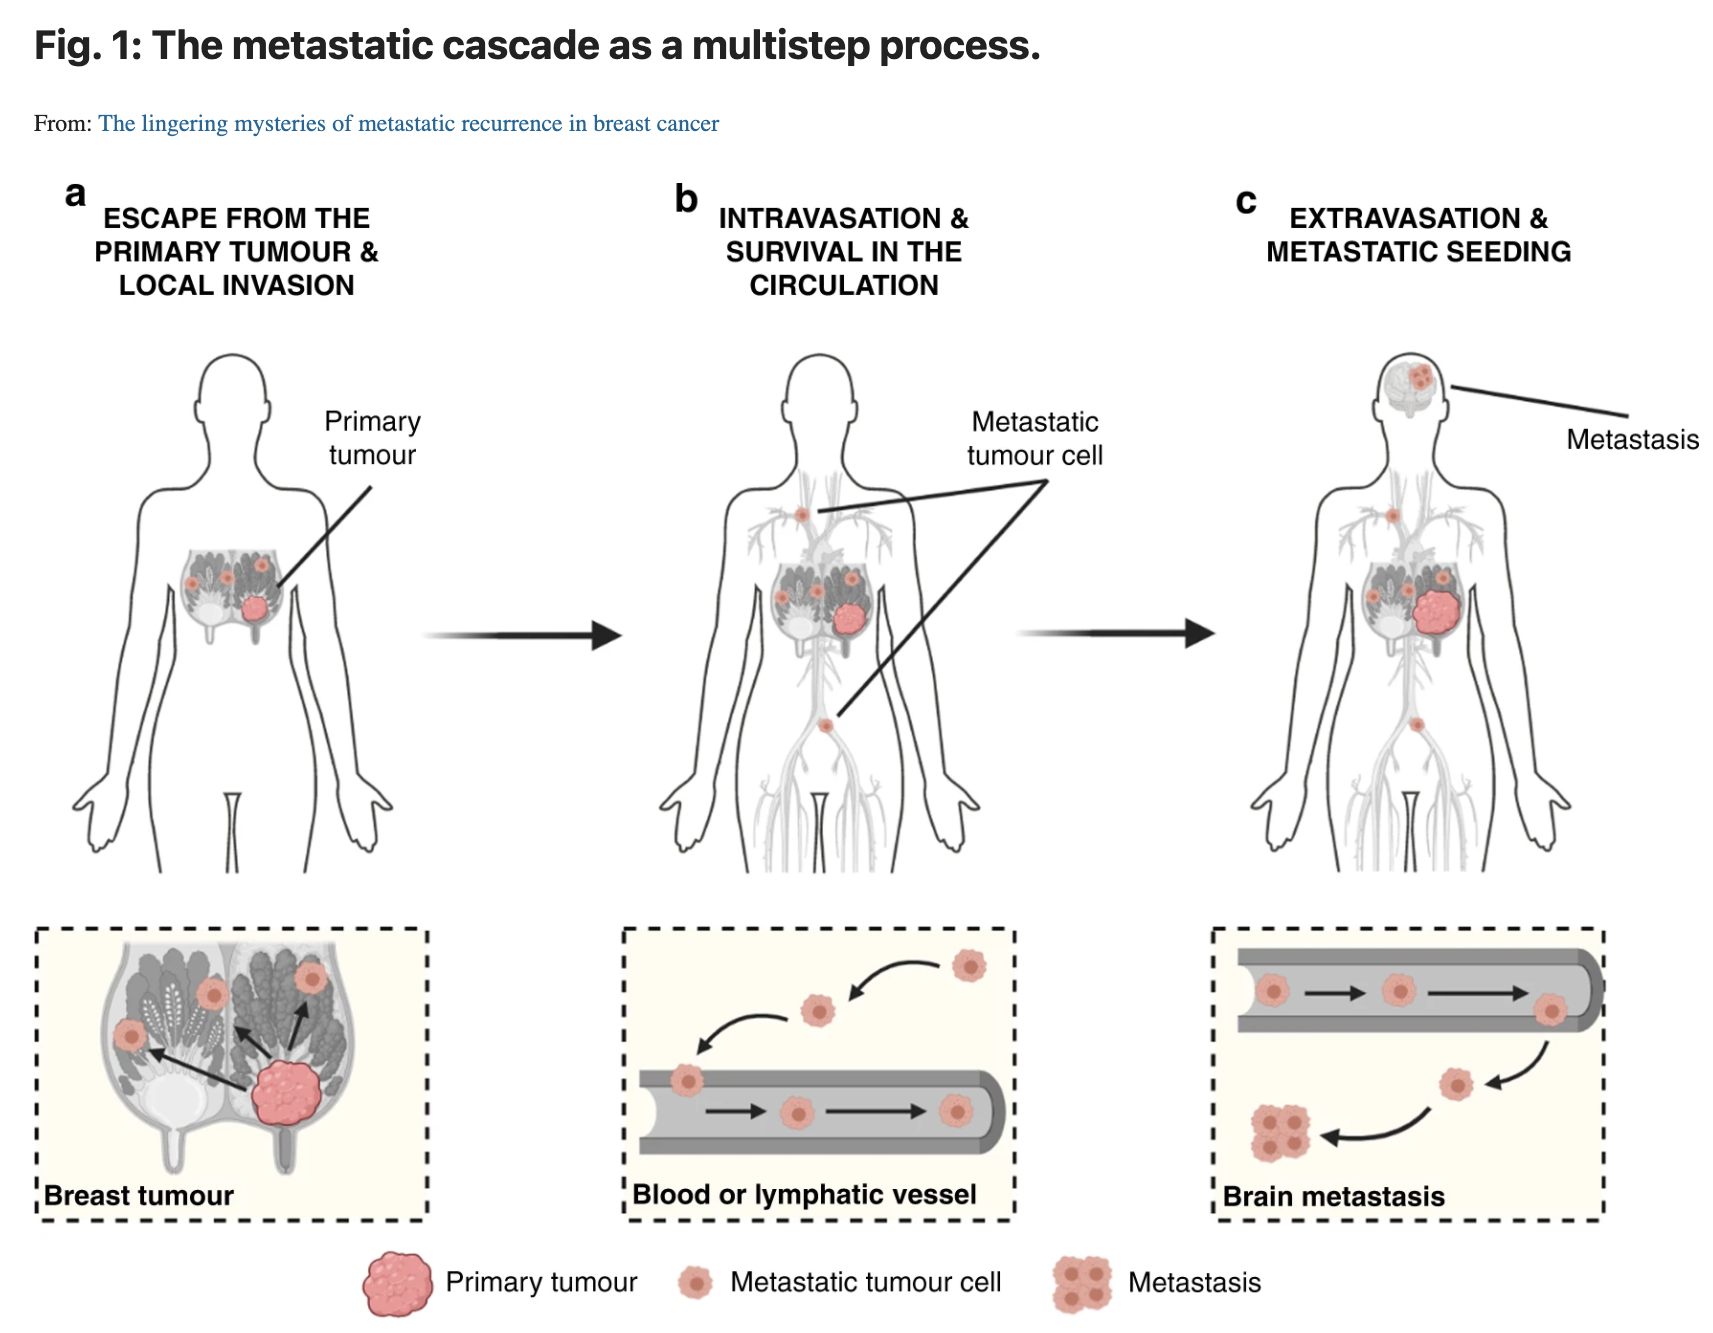 the lingering mysteries of metastatic recurrence in breast cancer in